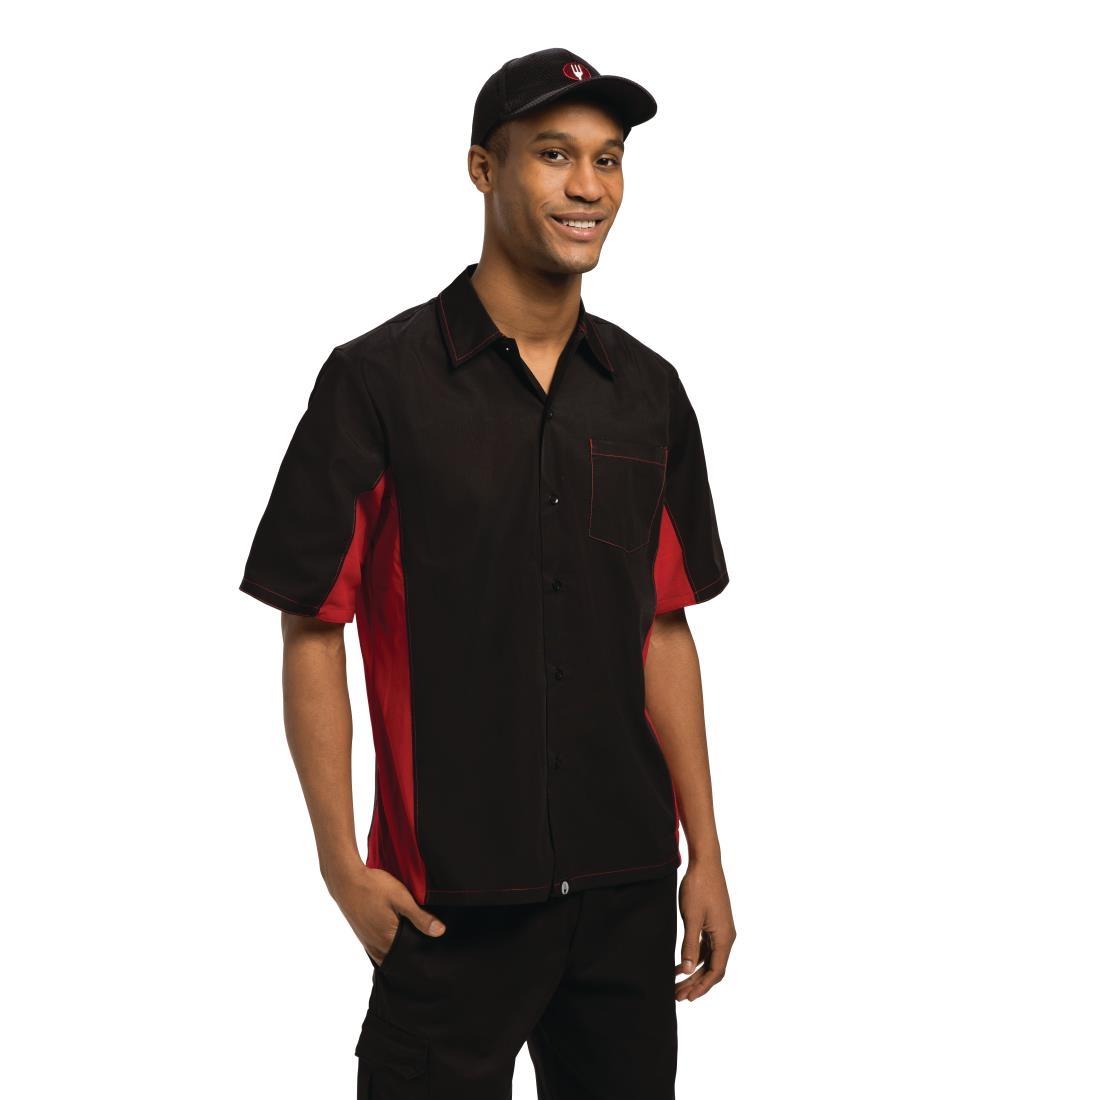 Chef Works Unisex Contrast Shirt Black and Red XL - A952-XL  - 1